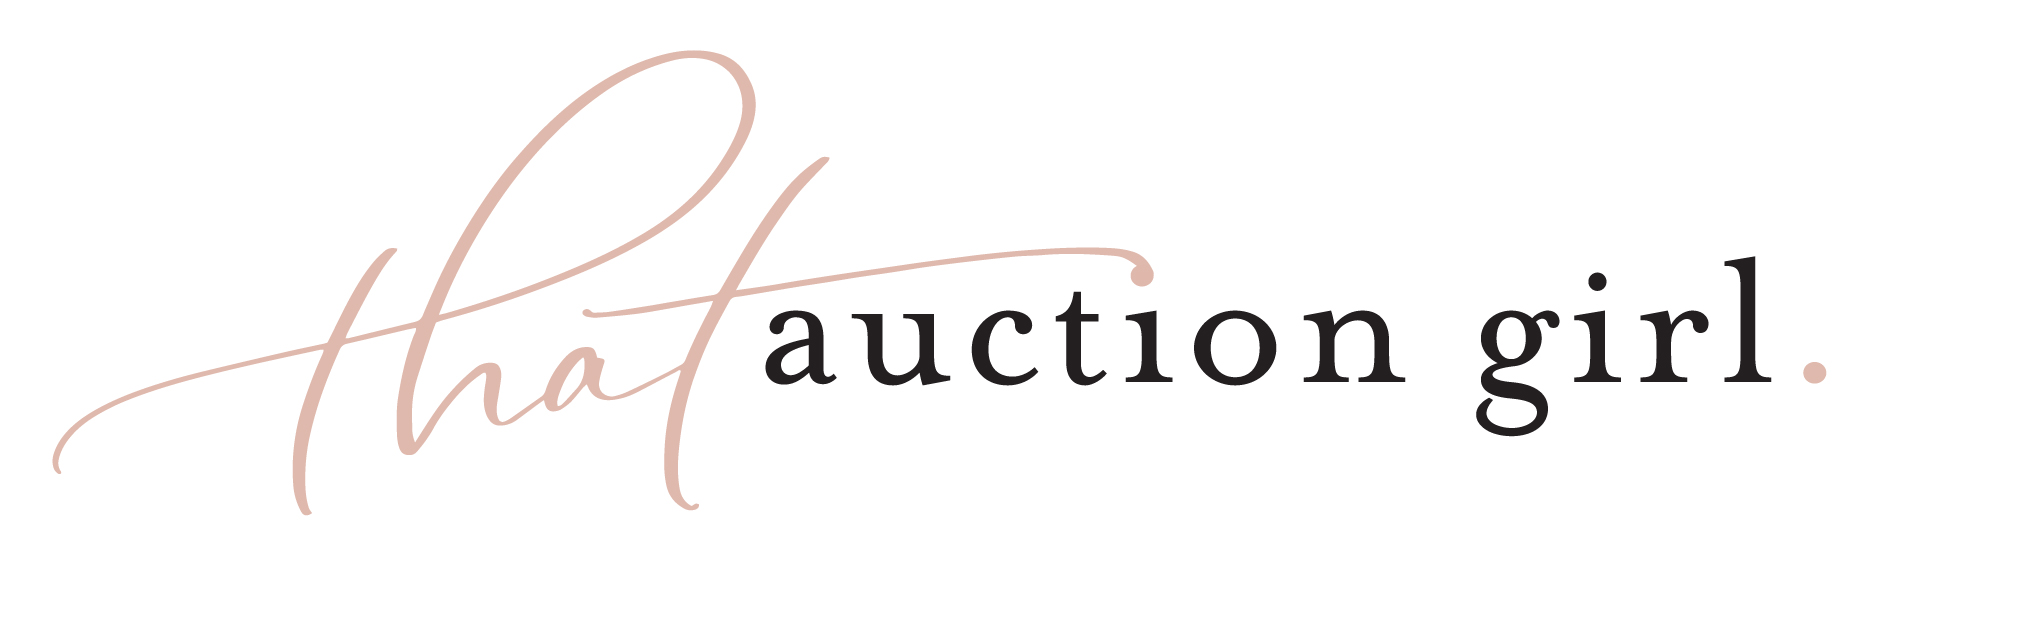 That Auction Girl